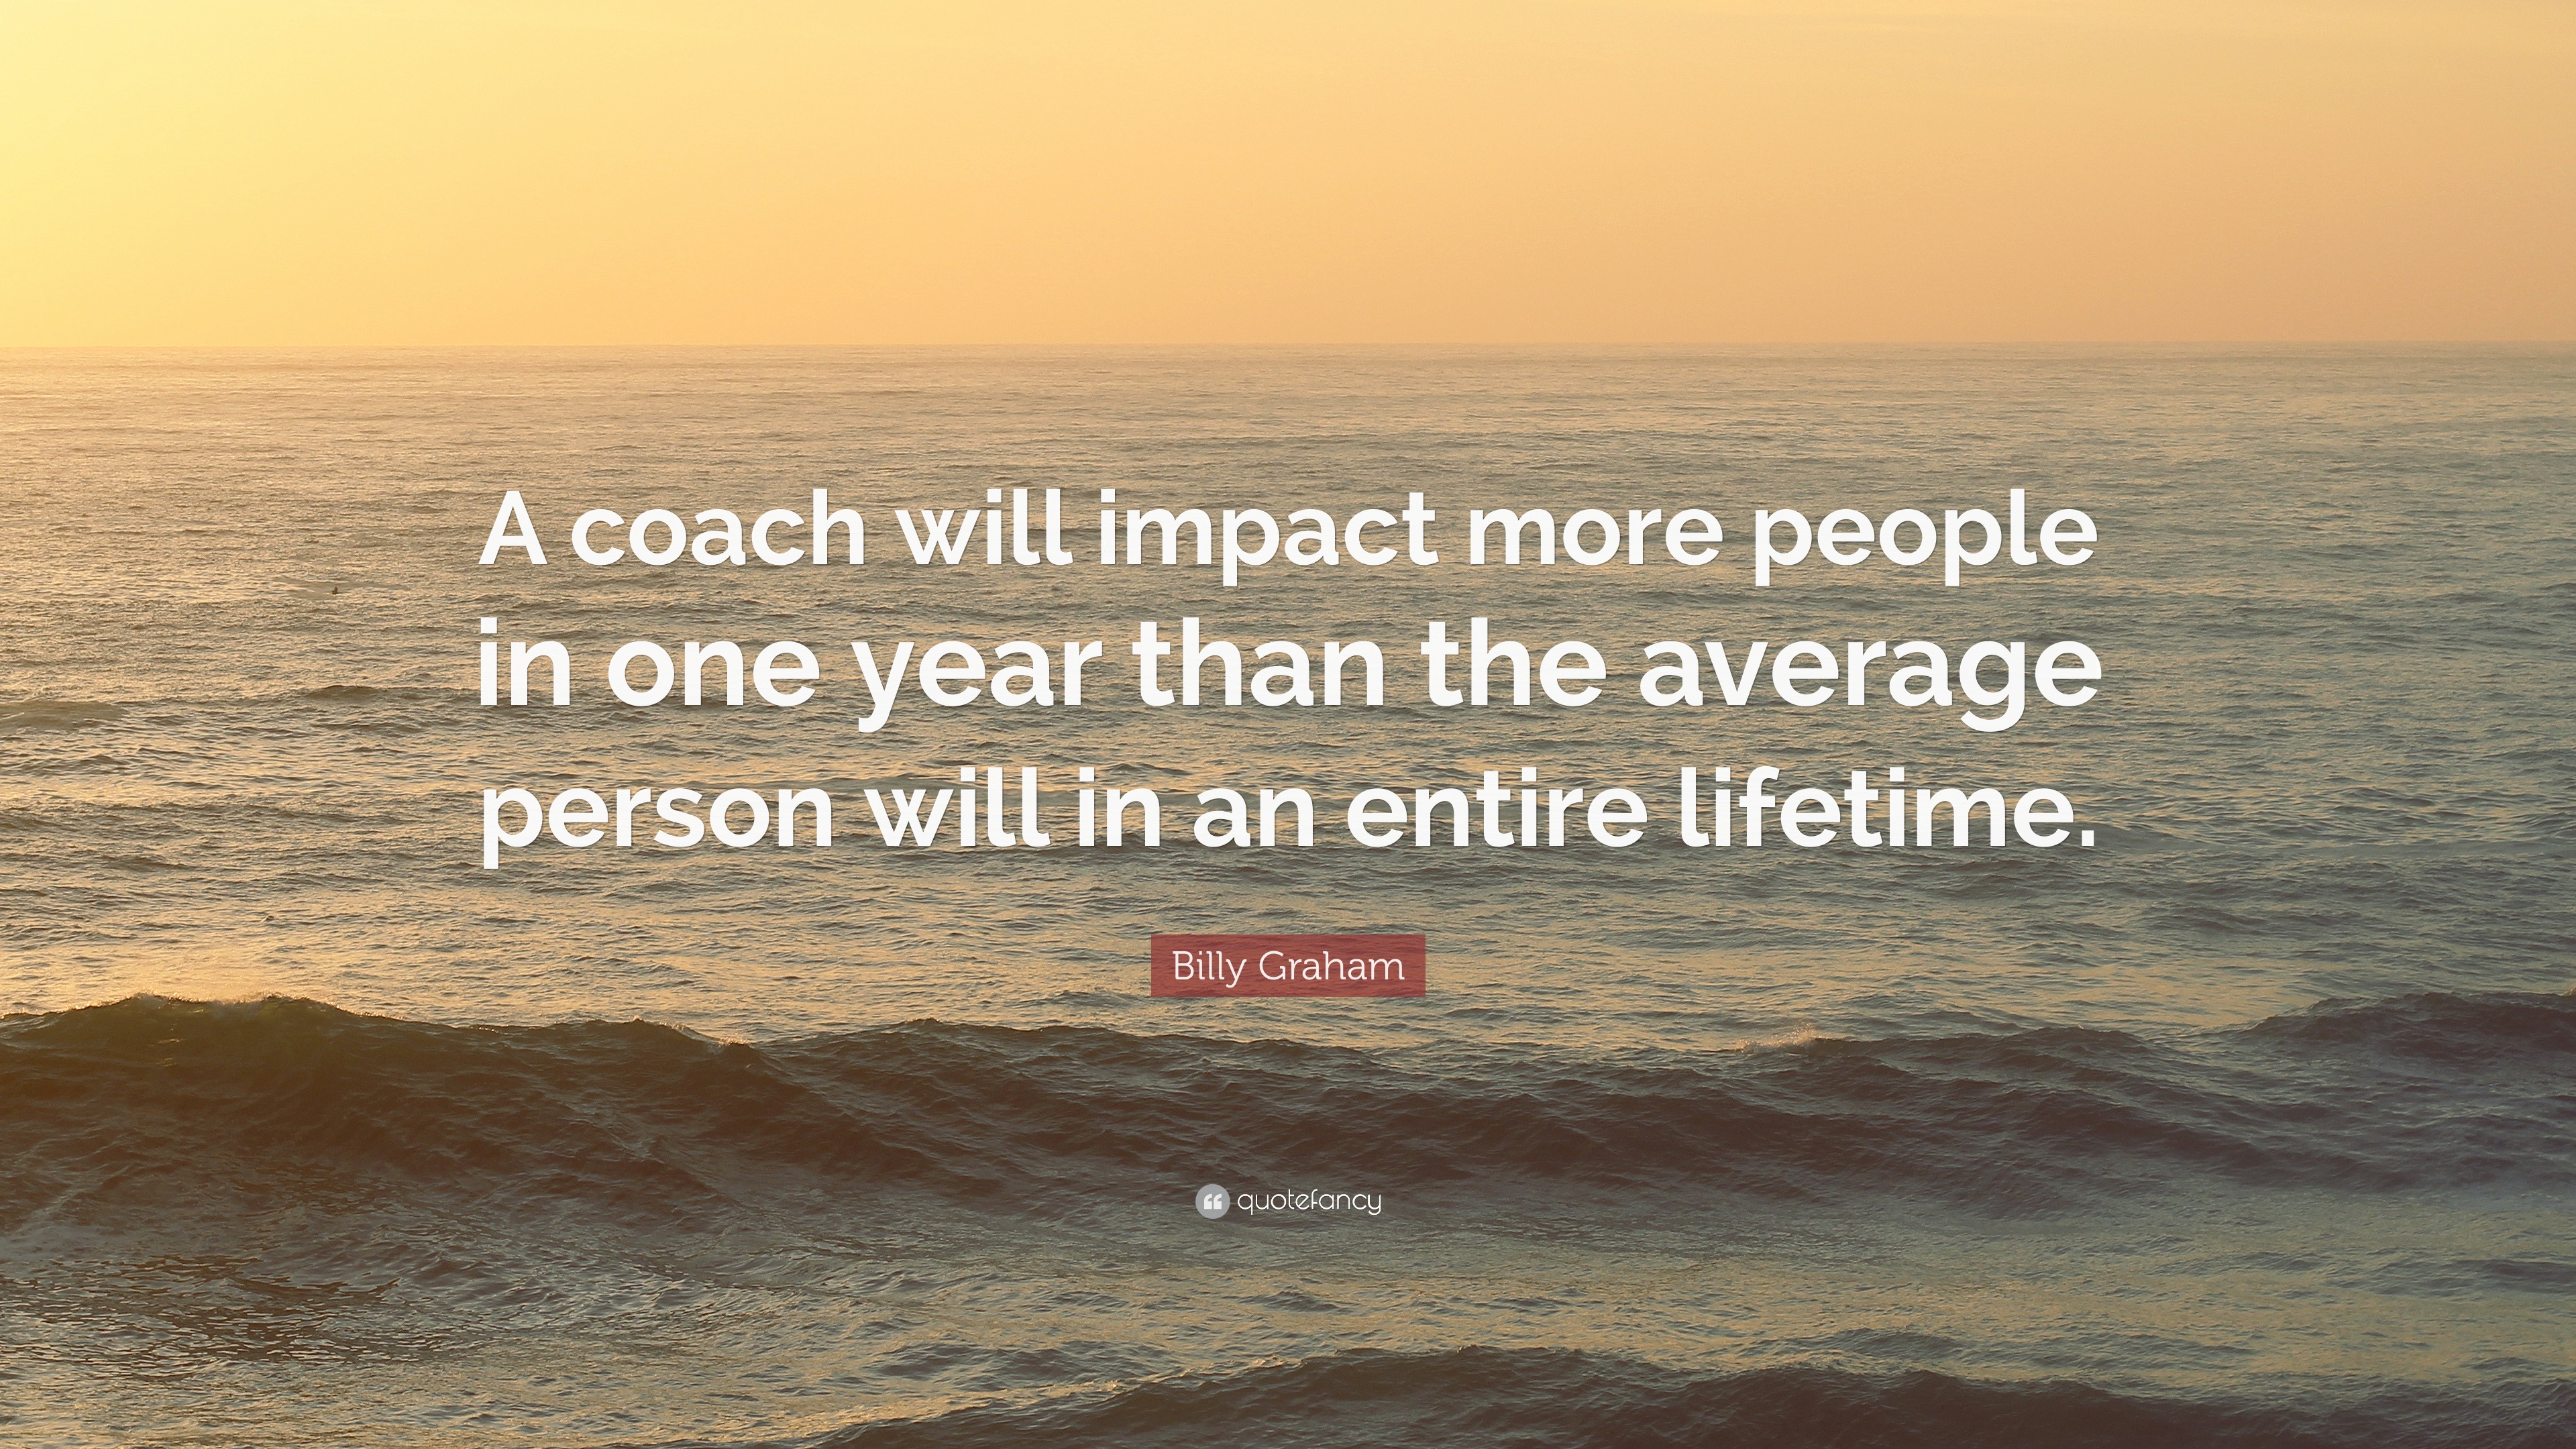 Billy Graham Quote: “A coach will impact more people in one year than